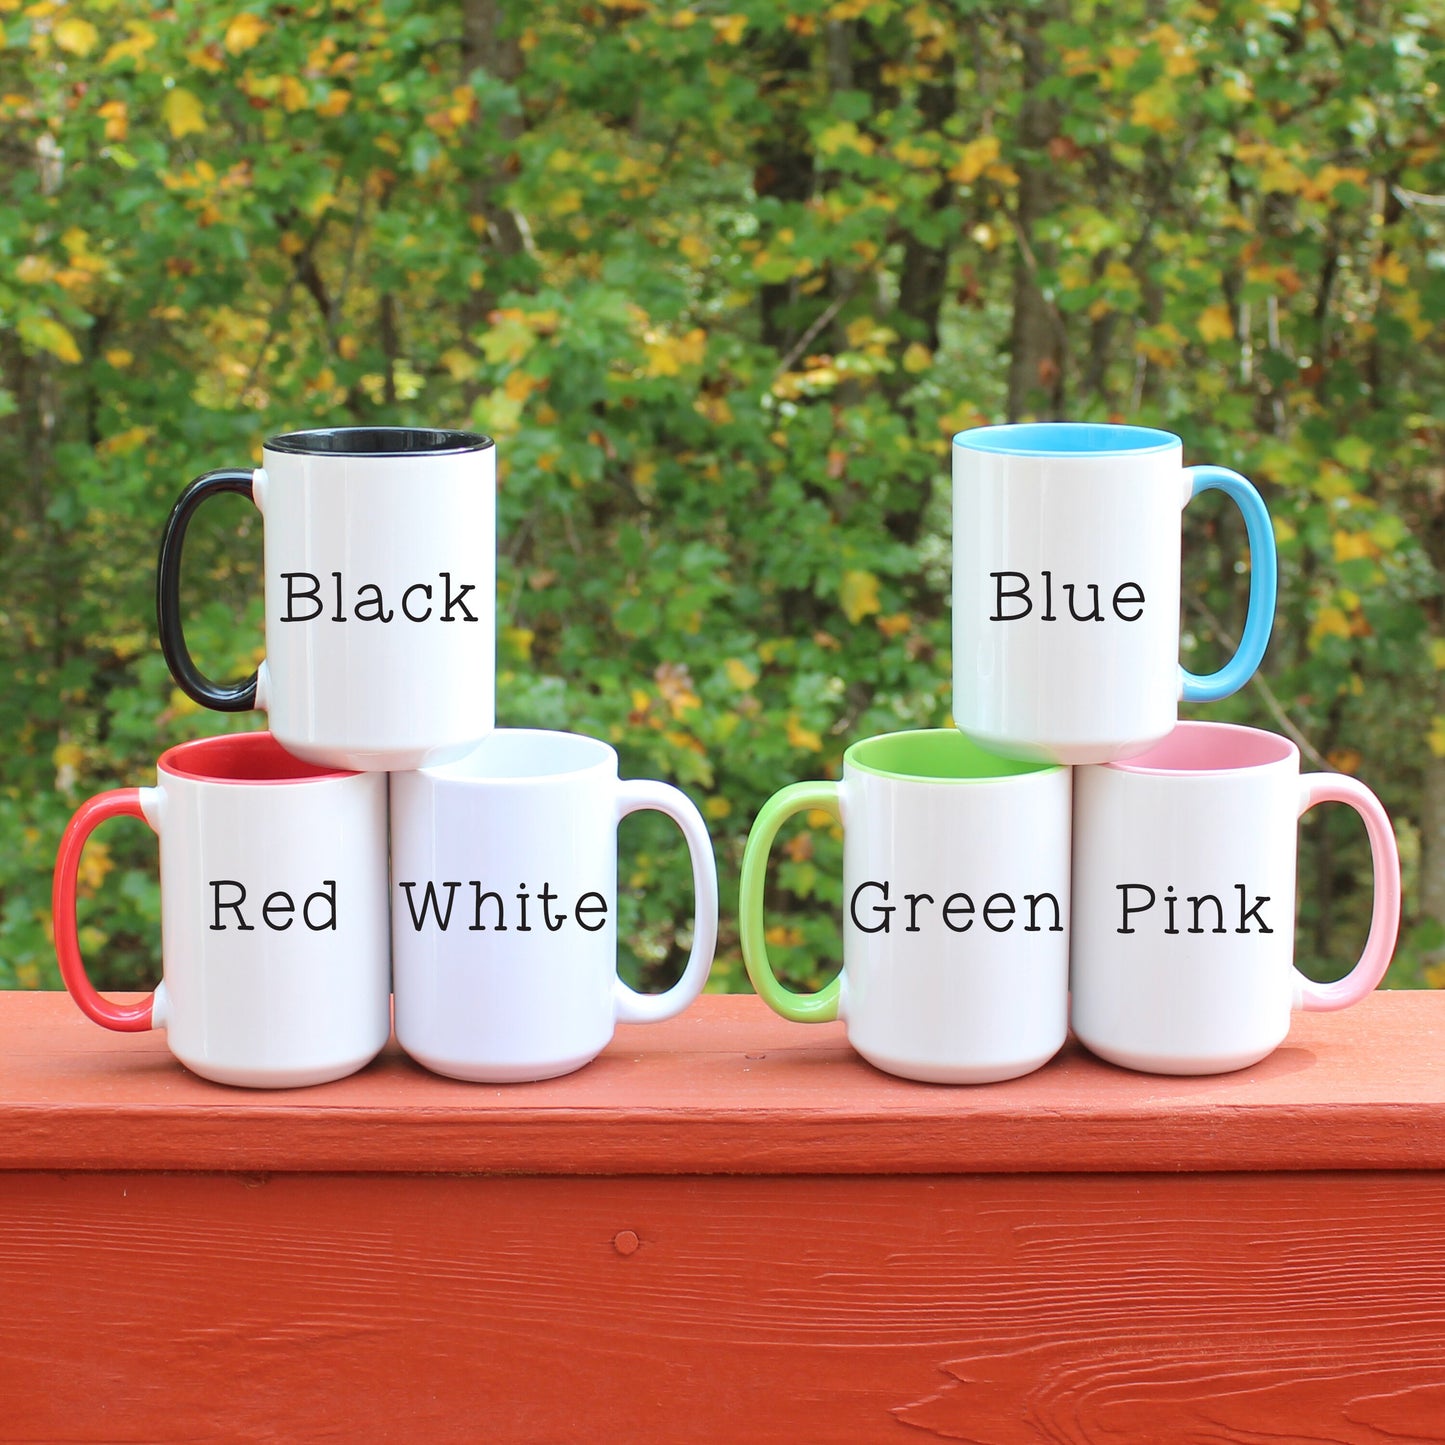 Coffee mug color options - black, red, white, blue, green, pink